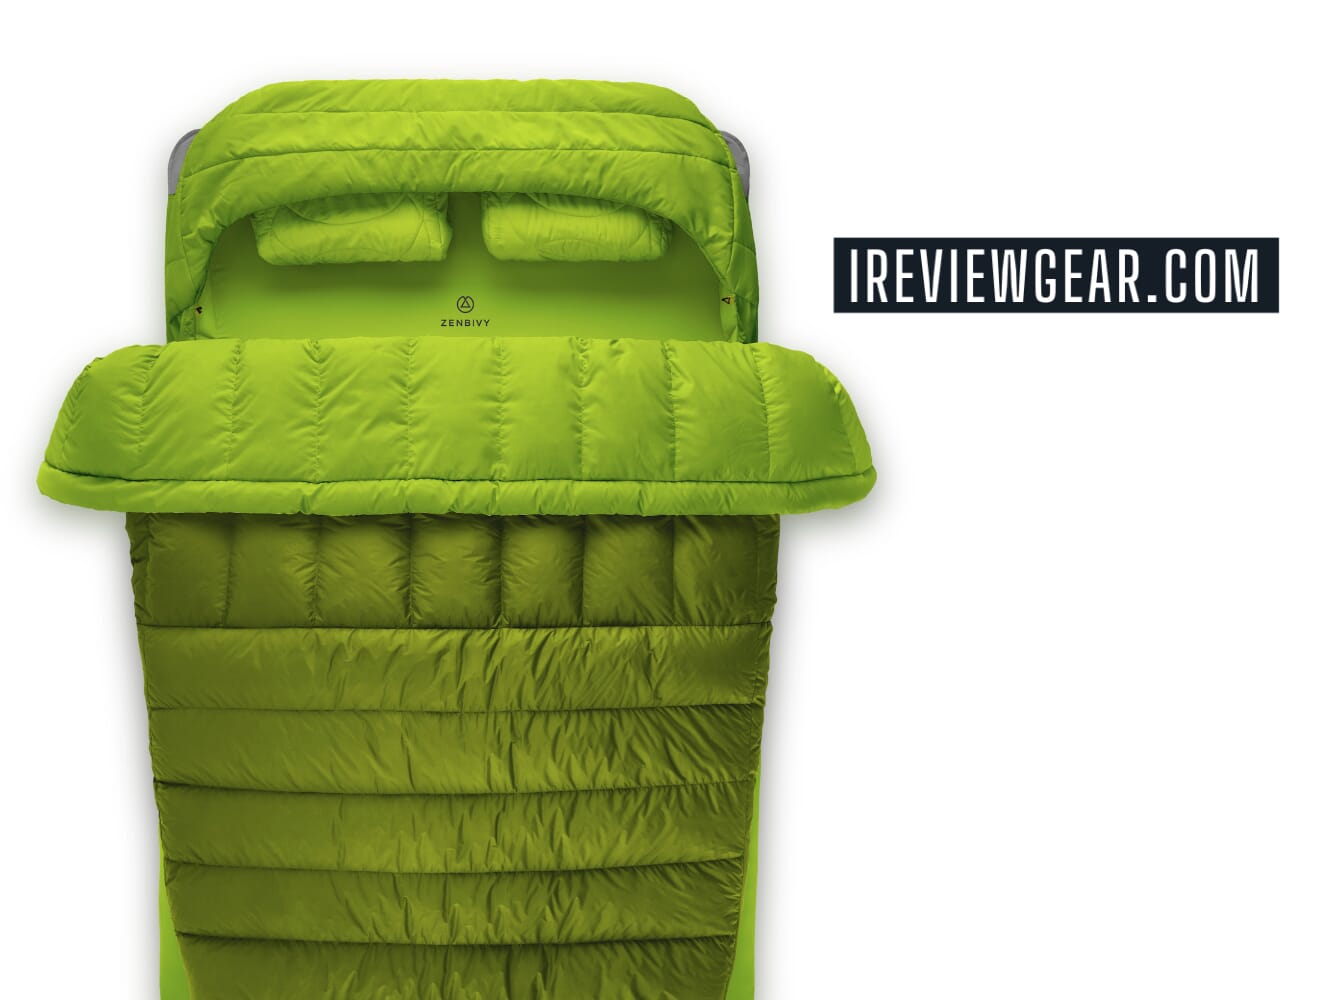 PRESS: iReviewGear's thoughts on the Luxe Bed Double 25°